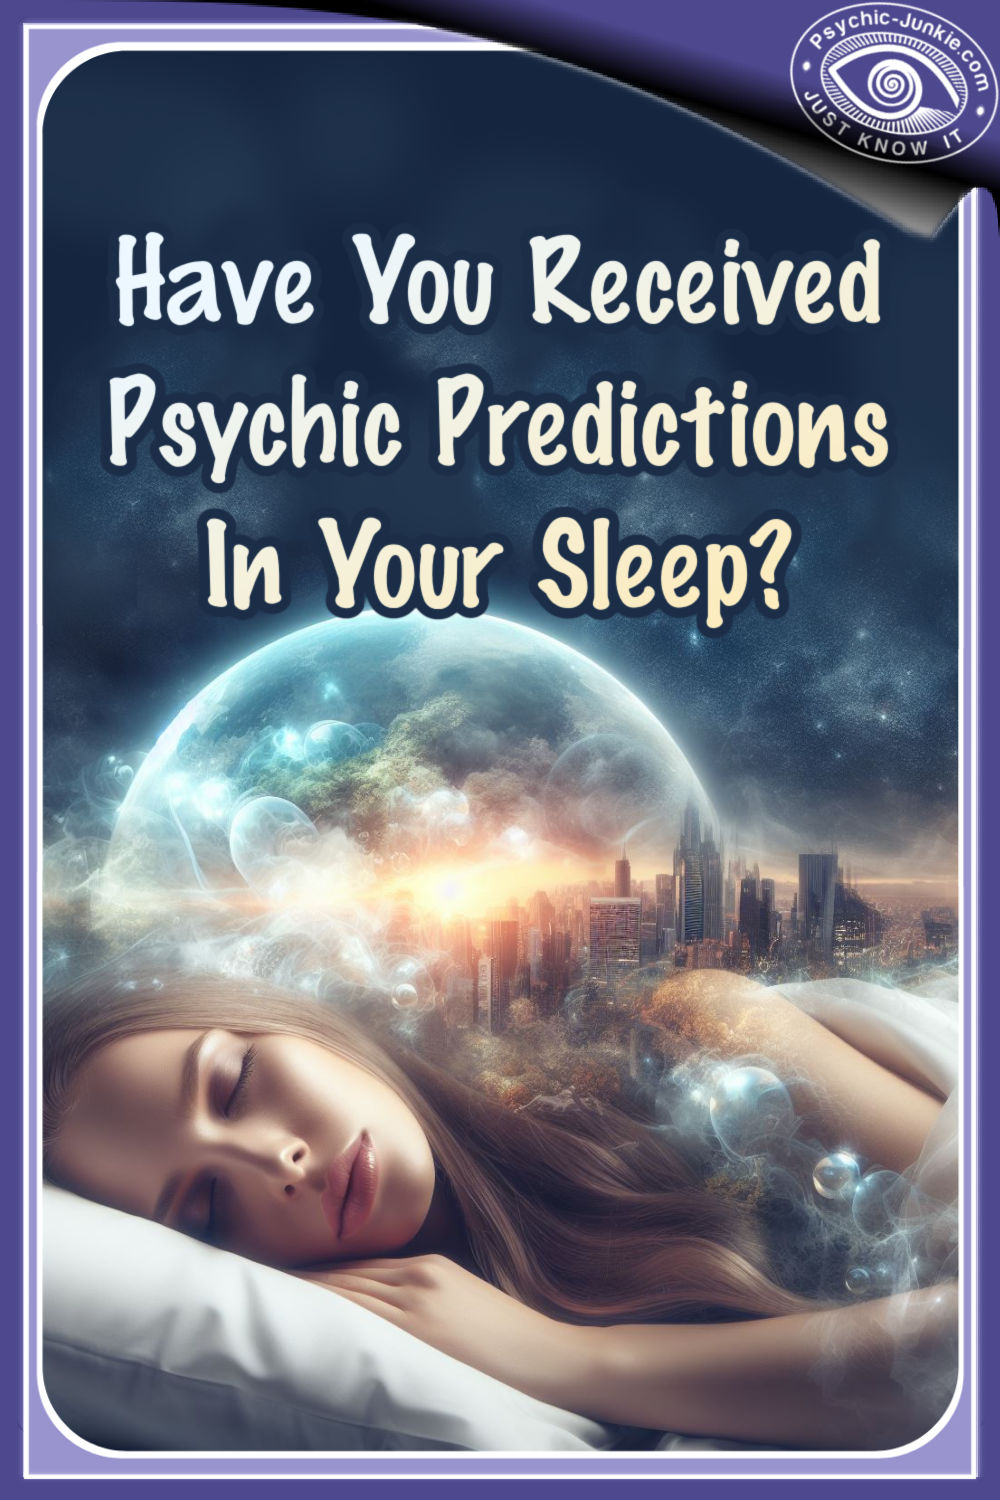 Have you received psychic predictions in your sleep?